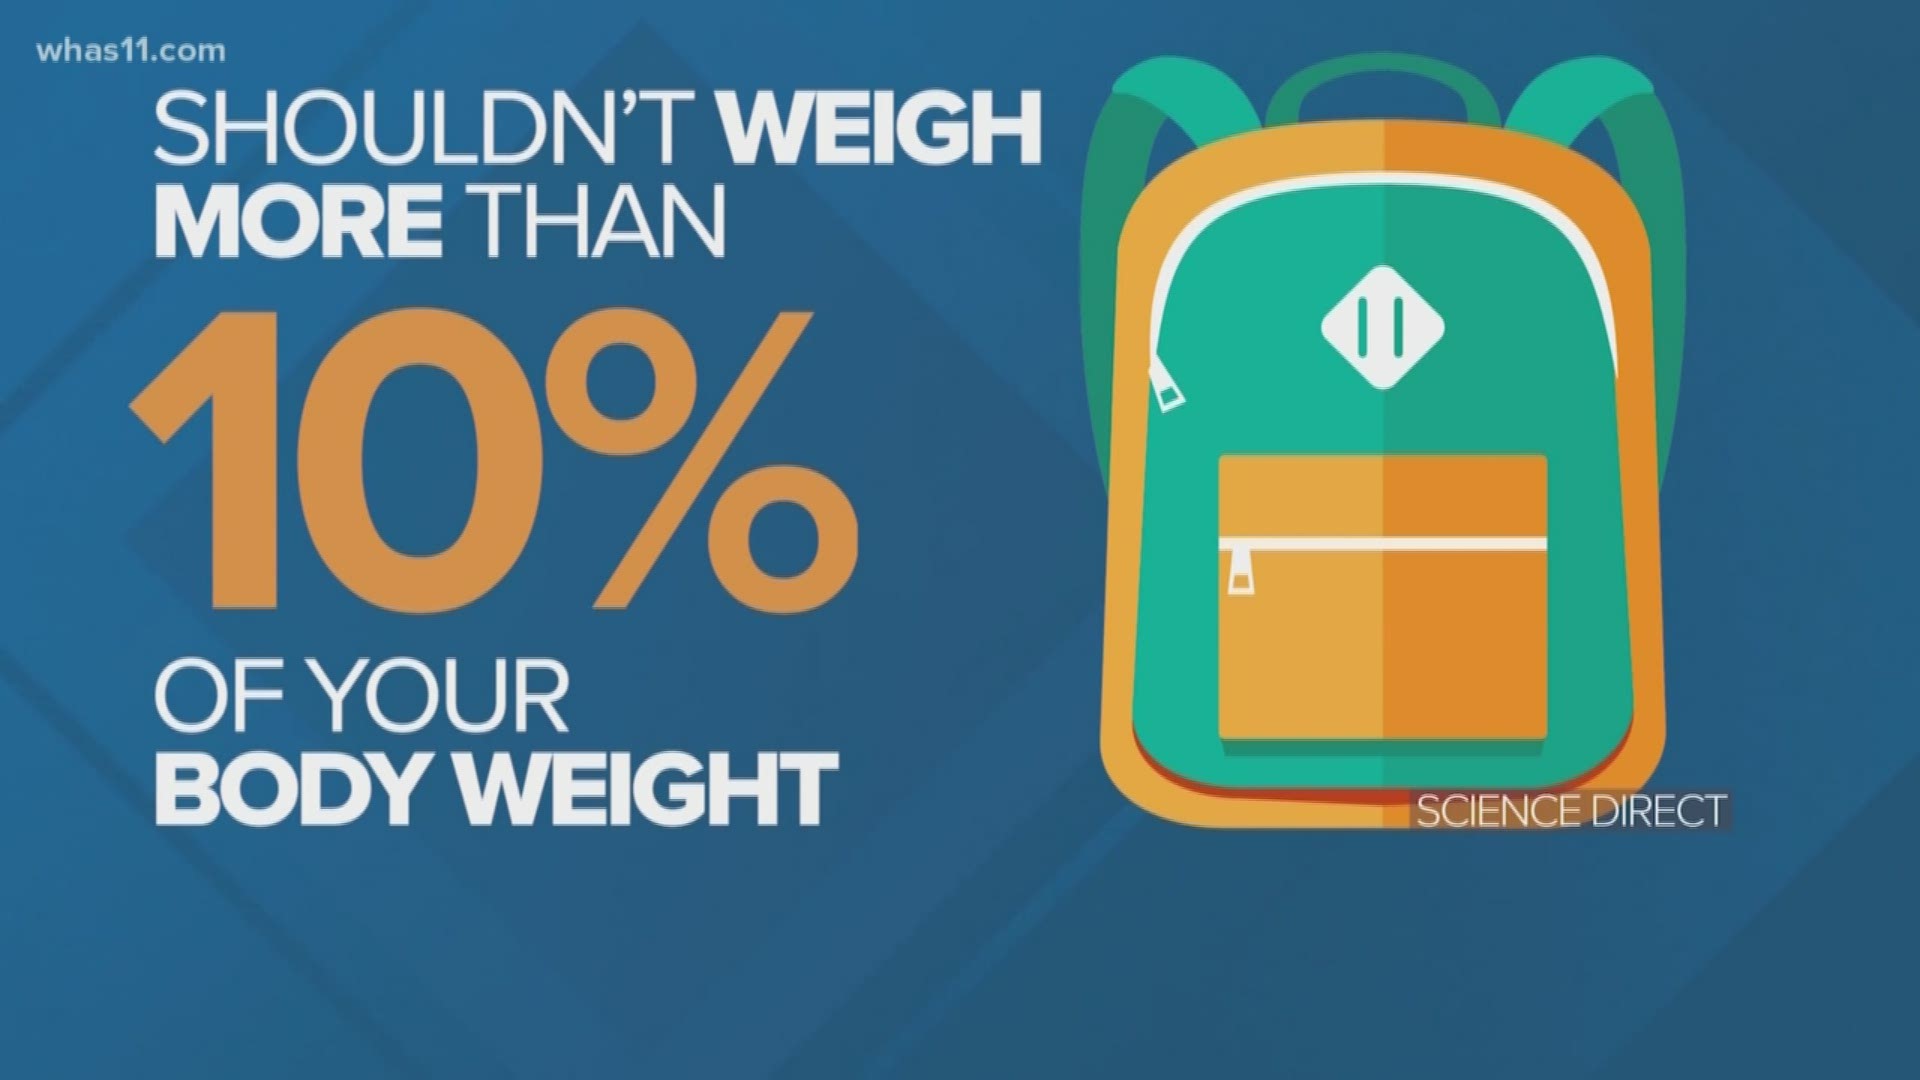 Between books, supplies, and personal items, backpacks can get pretty heavy. But heavier backpacks can really put some strain on our students.